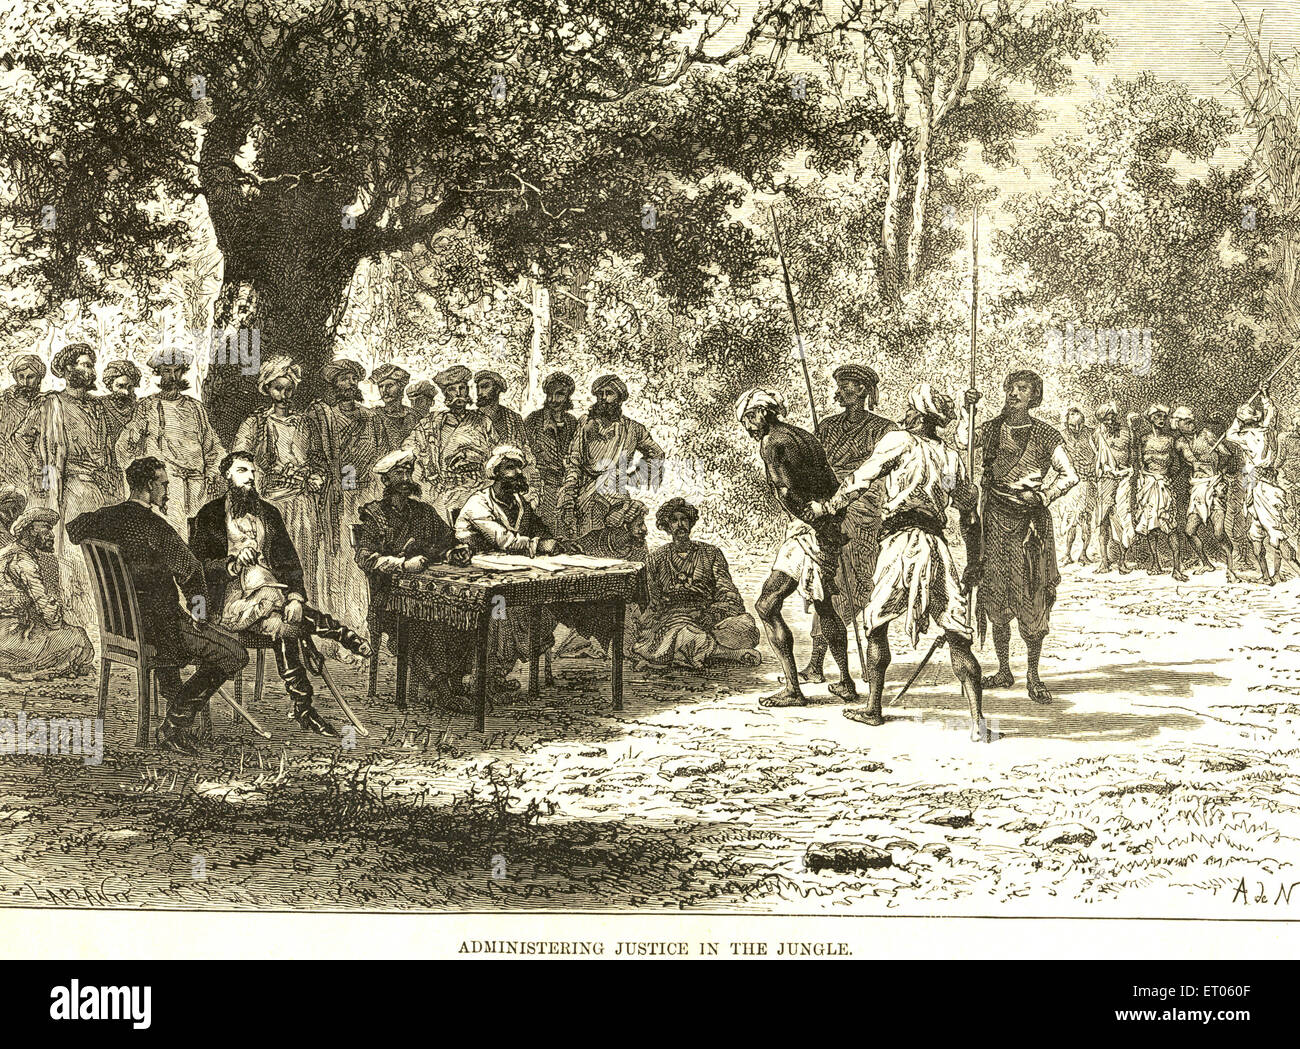 Village court, panchayat, British India, administering justice in the jungle, India, 1800s, old vintage 1800 engraving Stock Photo